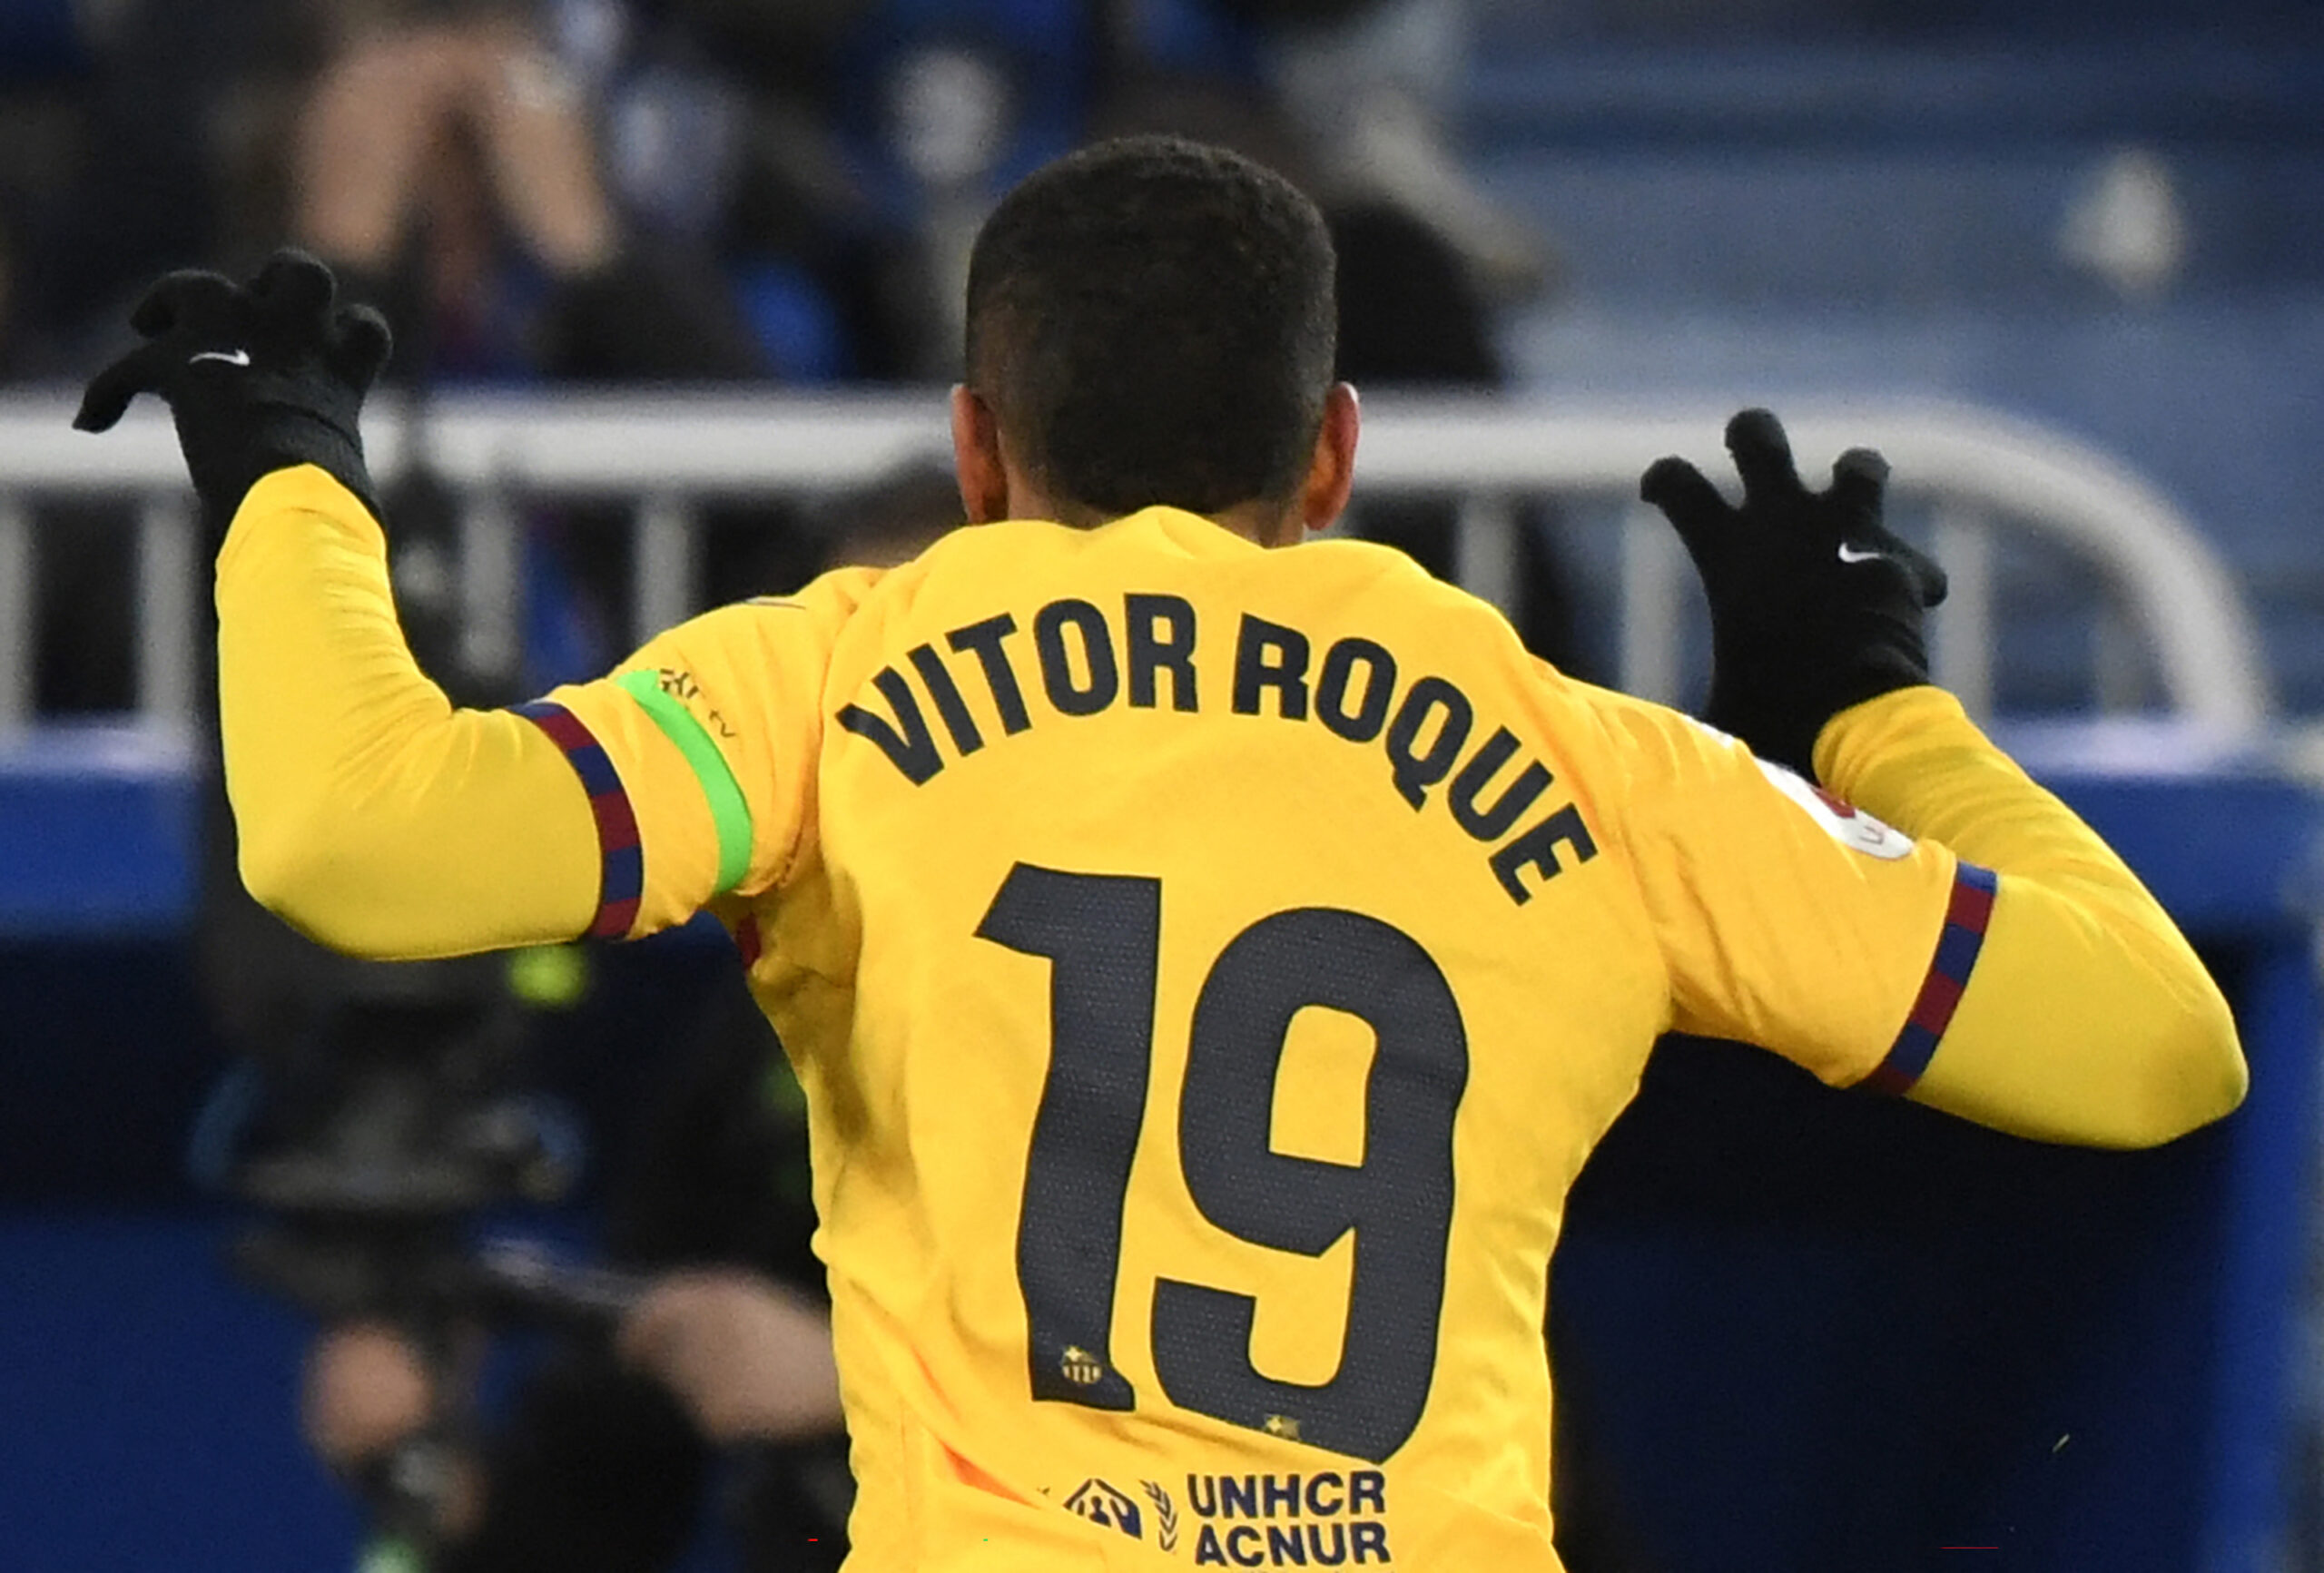 TOPSHOT - Barcelona's Brazilian forward #19 Vitor Roque celebrates scoring his team's third goal during the Spanish league football match between Deportivo Alaves and FC Barcelona at the Mendizorroza stadium in Vitoria on February 3, 2024.